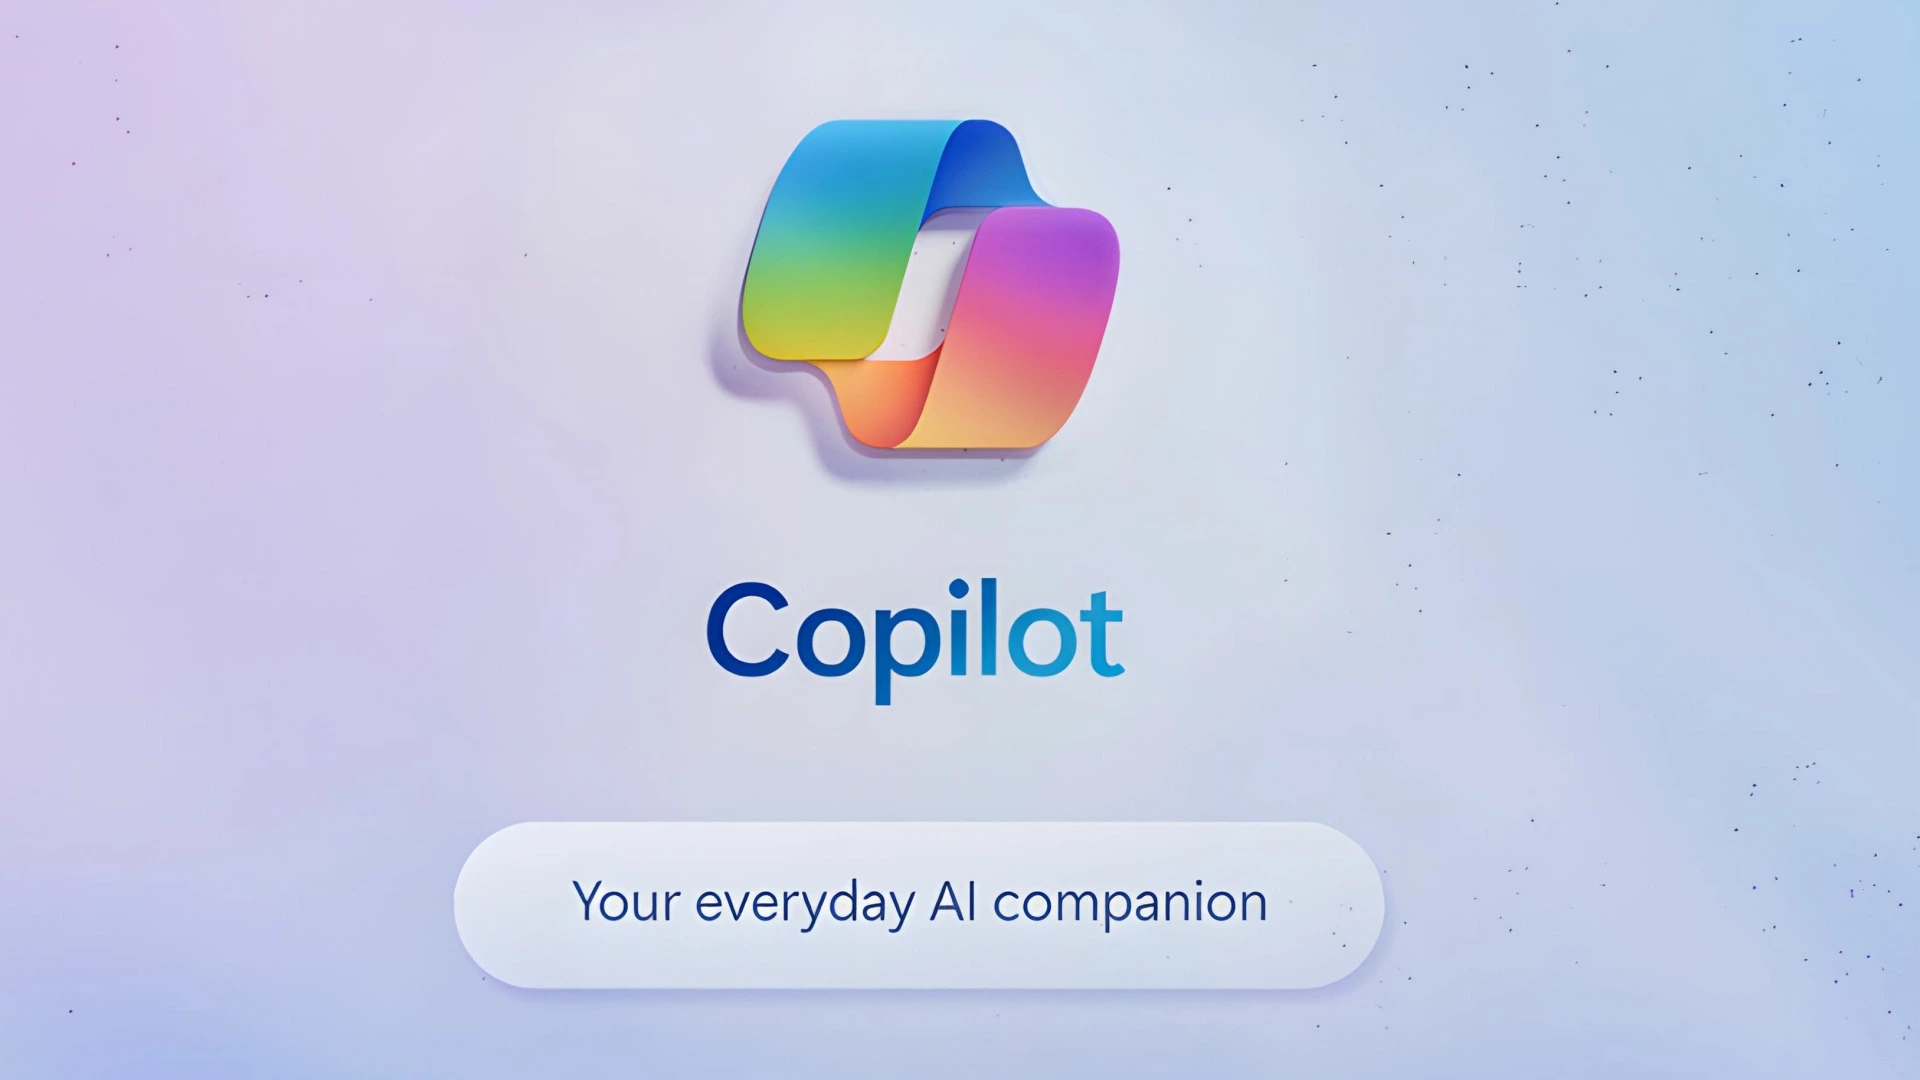 Copilot AI assistant for Microsoft 365 and Dynamics 365